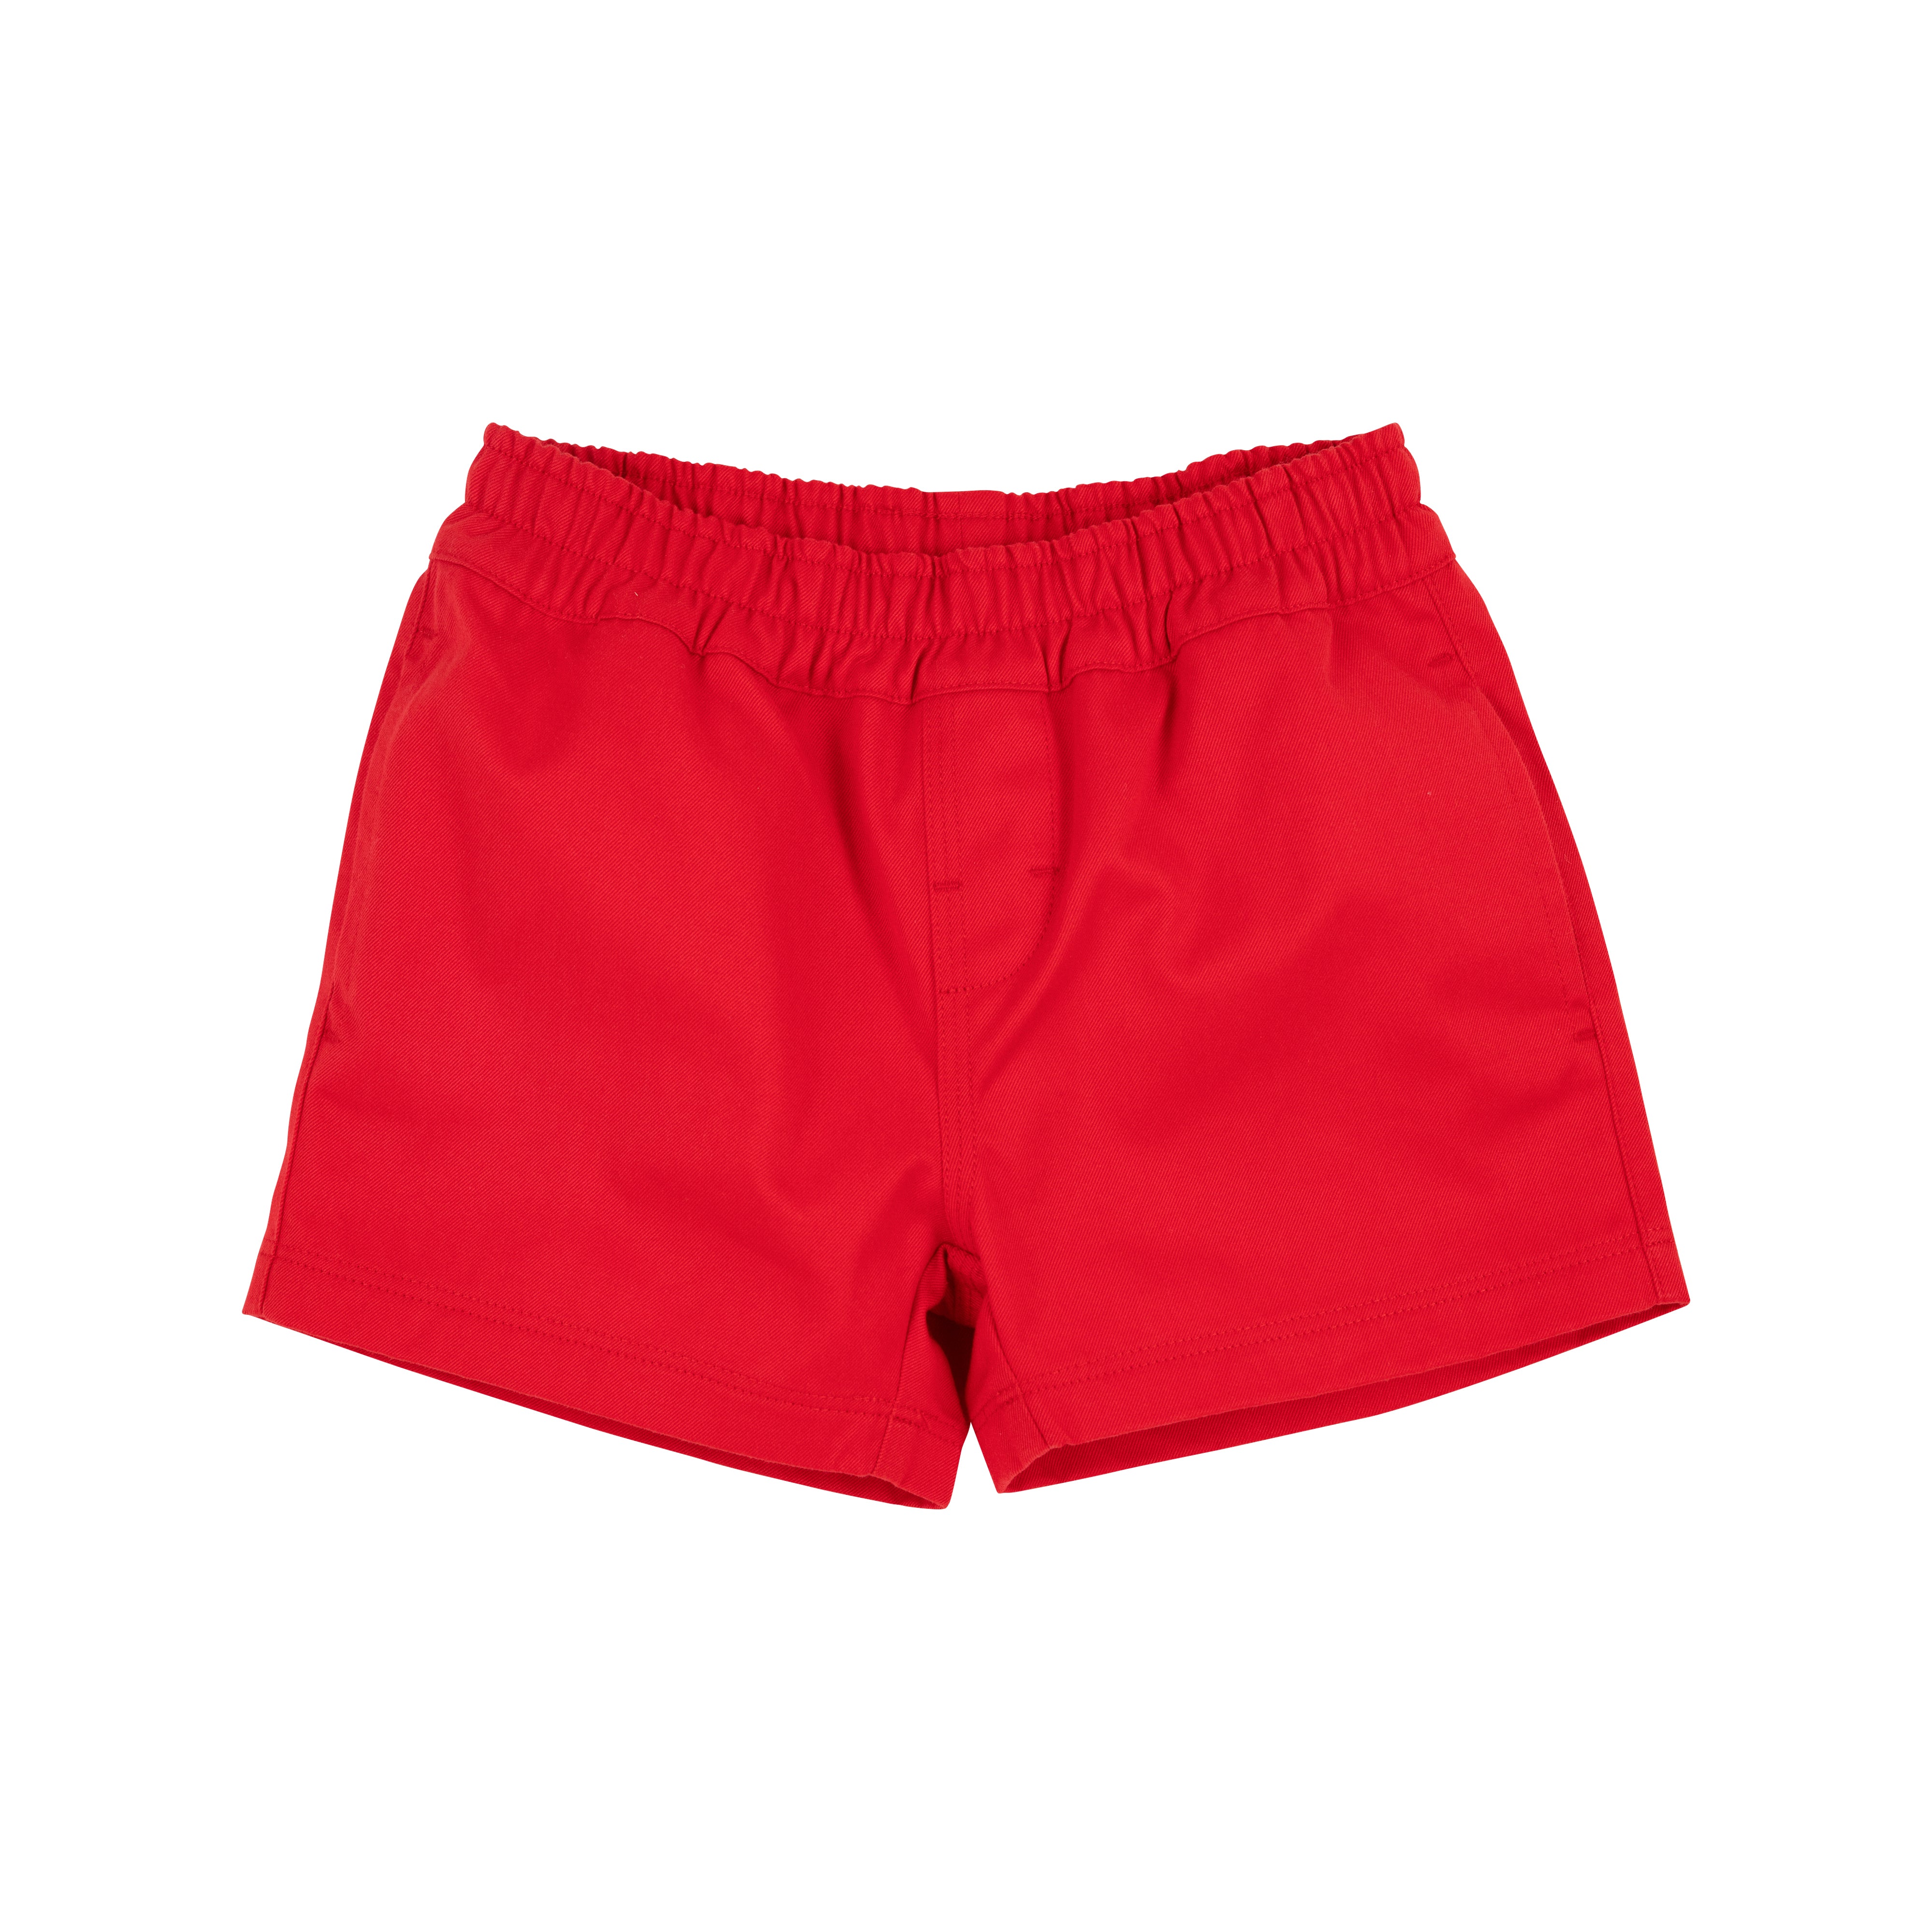 Sheffield Shorts - Richmond Red with Multicolor Stork